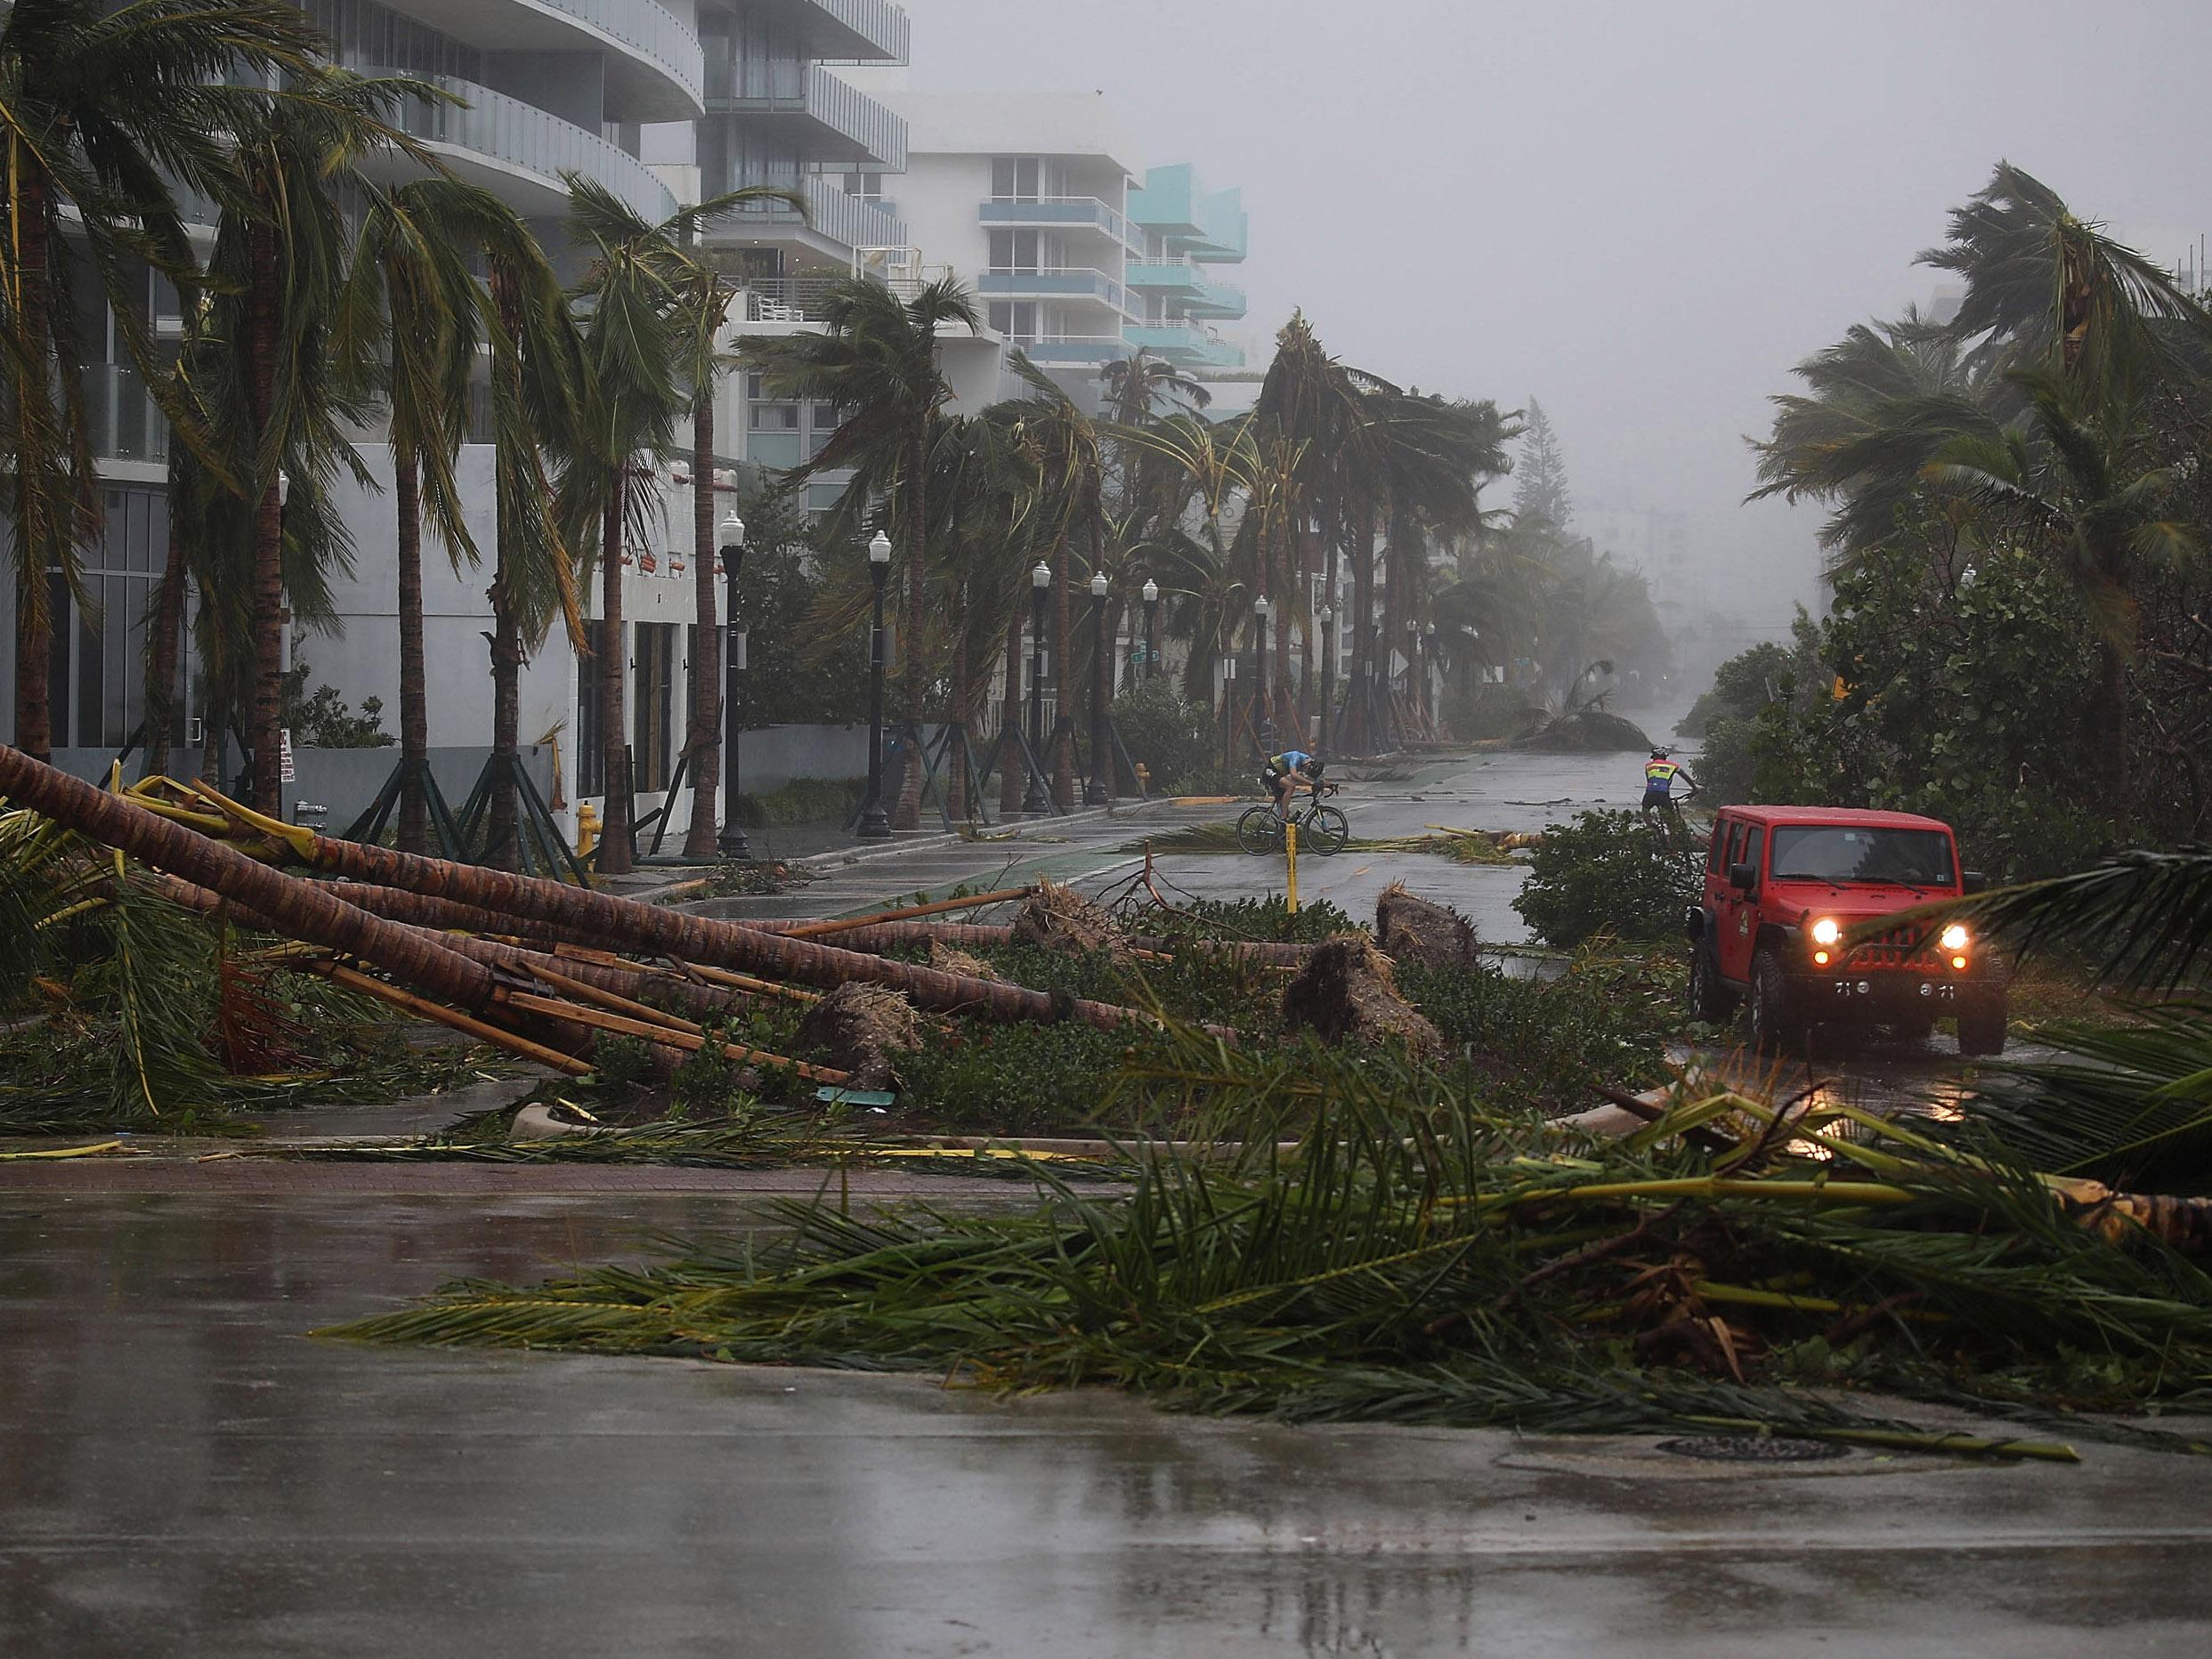 Paramedics and firefighters were hindered from call outs for help in Miami as Category 4 storm raged across the city